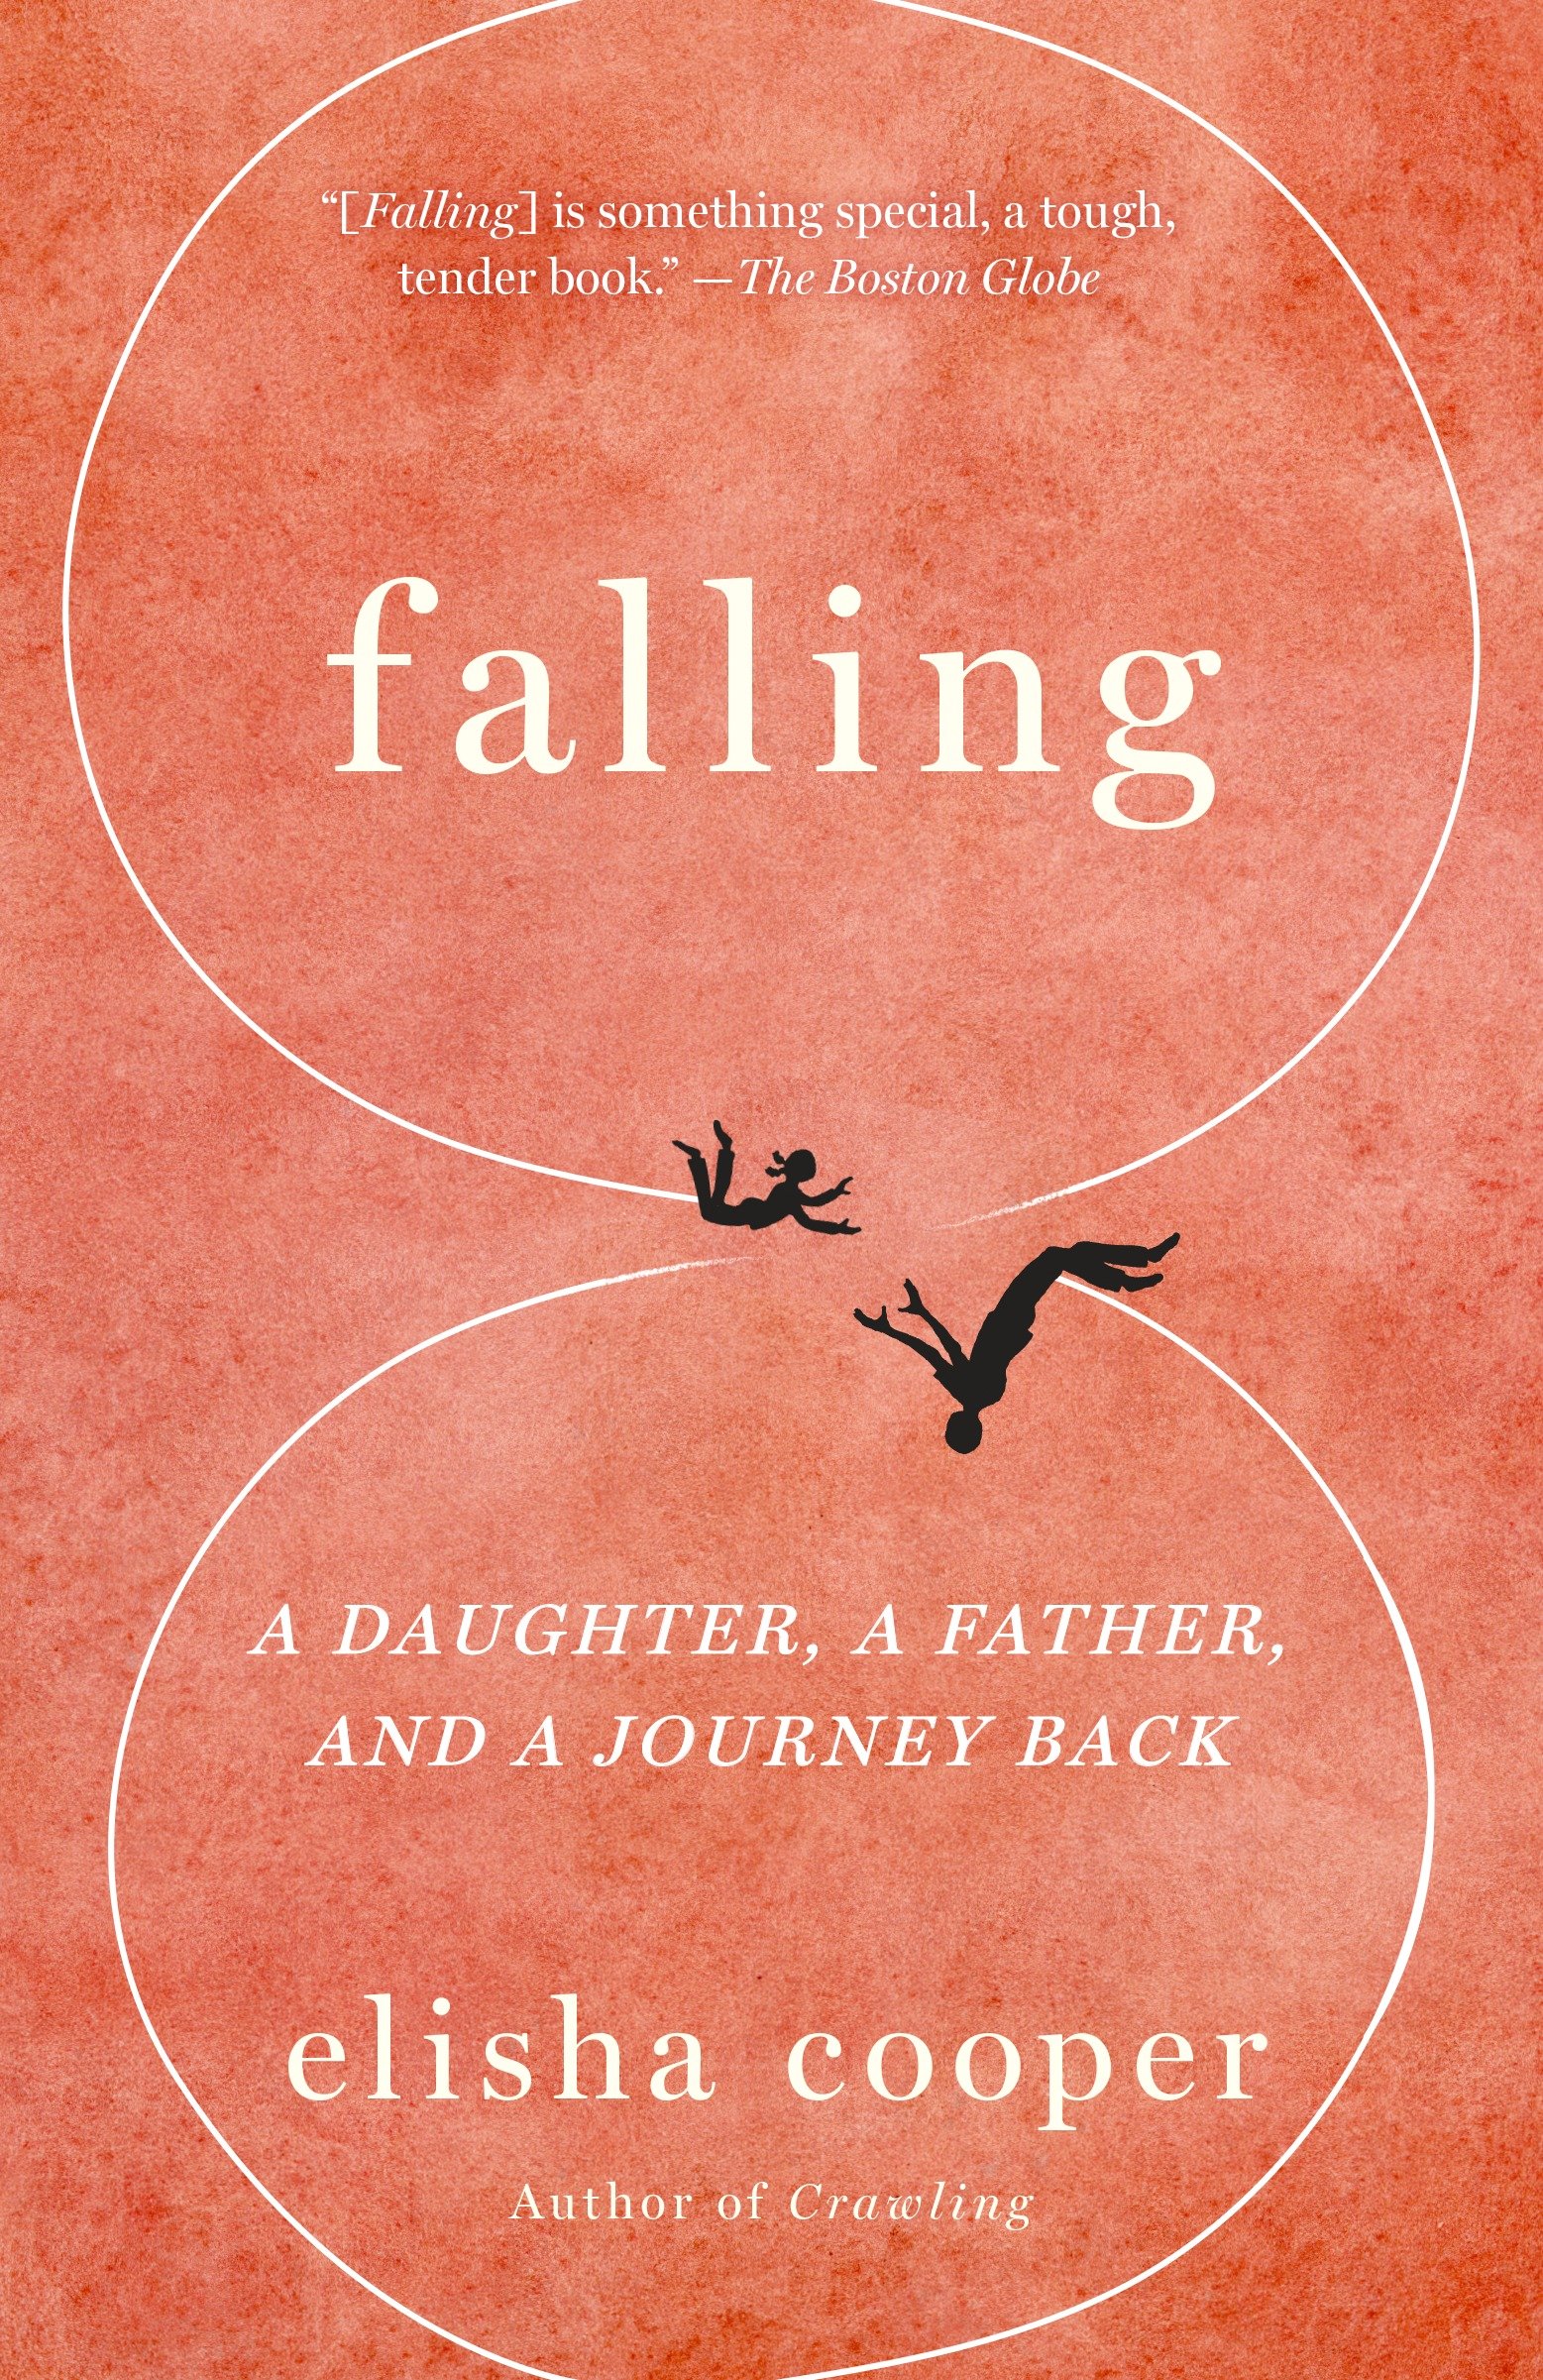 Image de couverture de Falling [electronic resource] : A Daughter, a Father, and a Journey Back